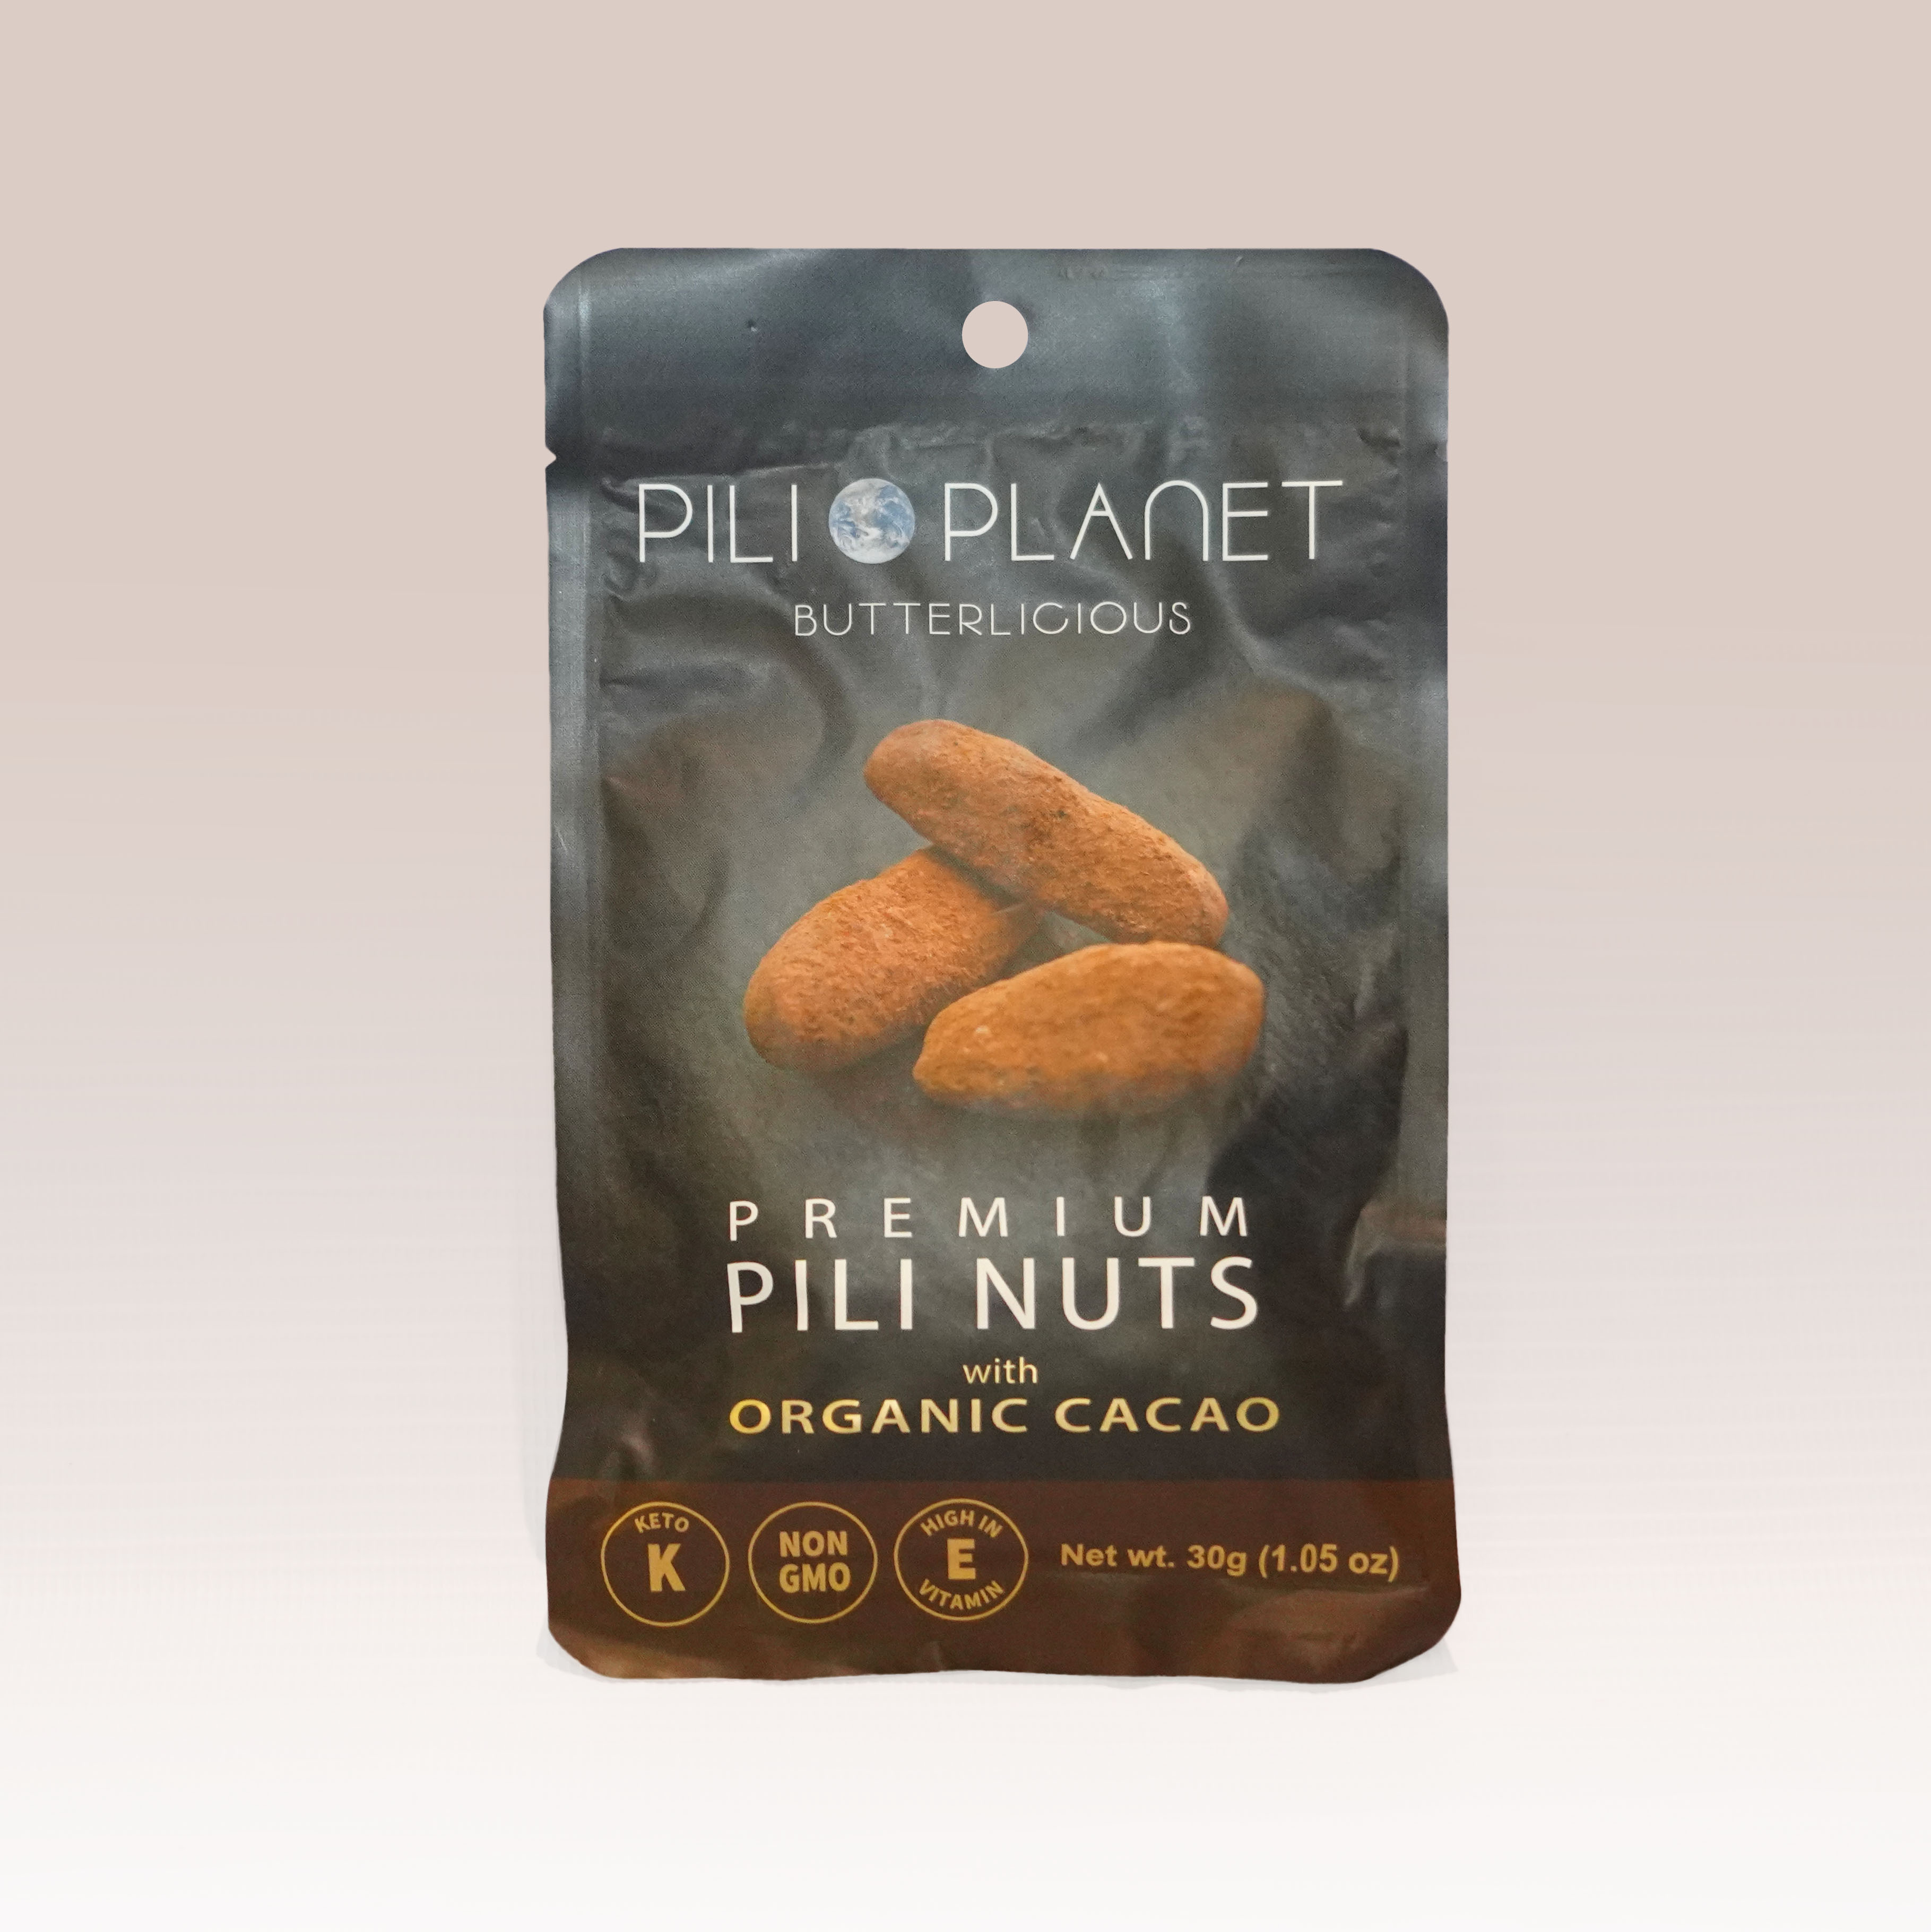 Pili Planet Premium Pili Nuts with Organic Cacao (30g)